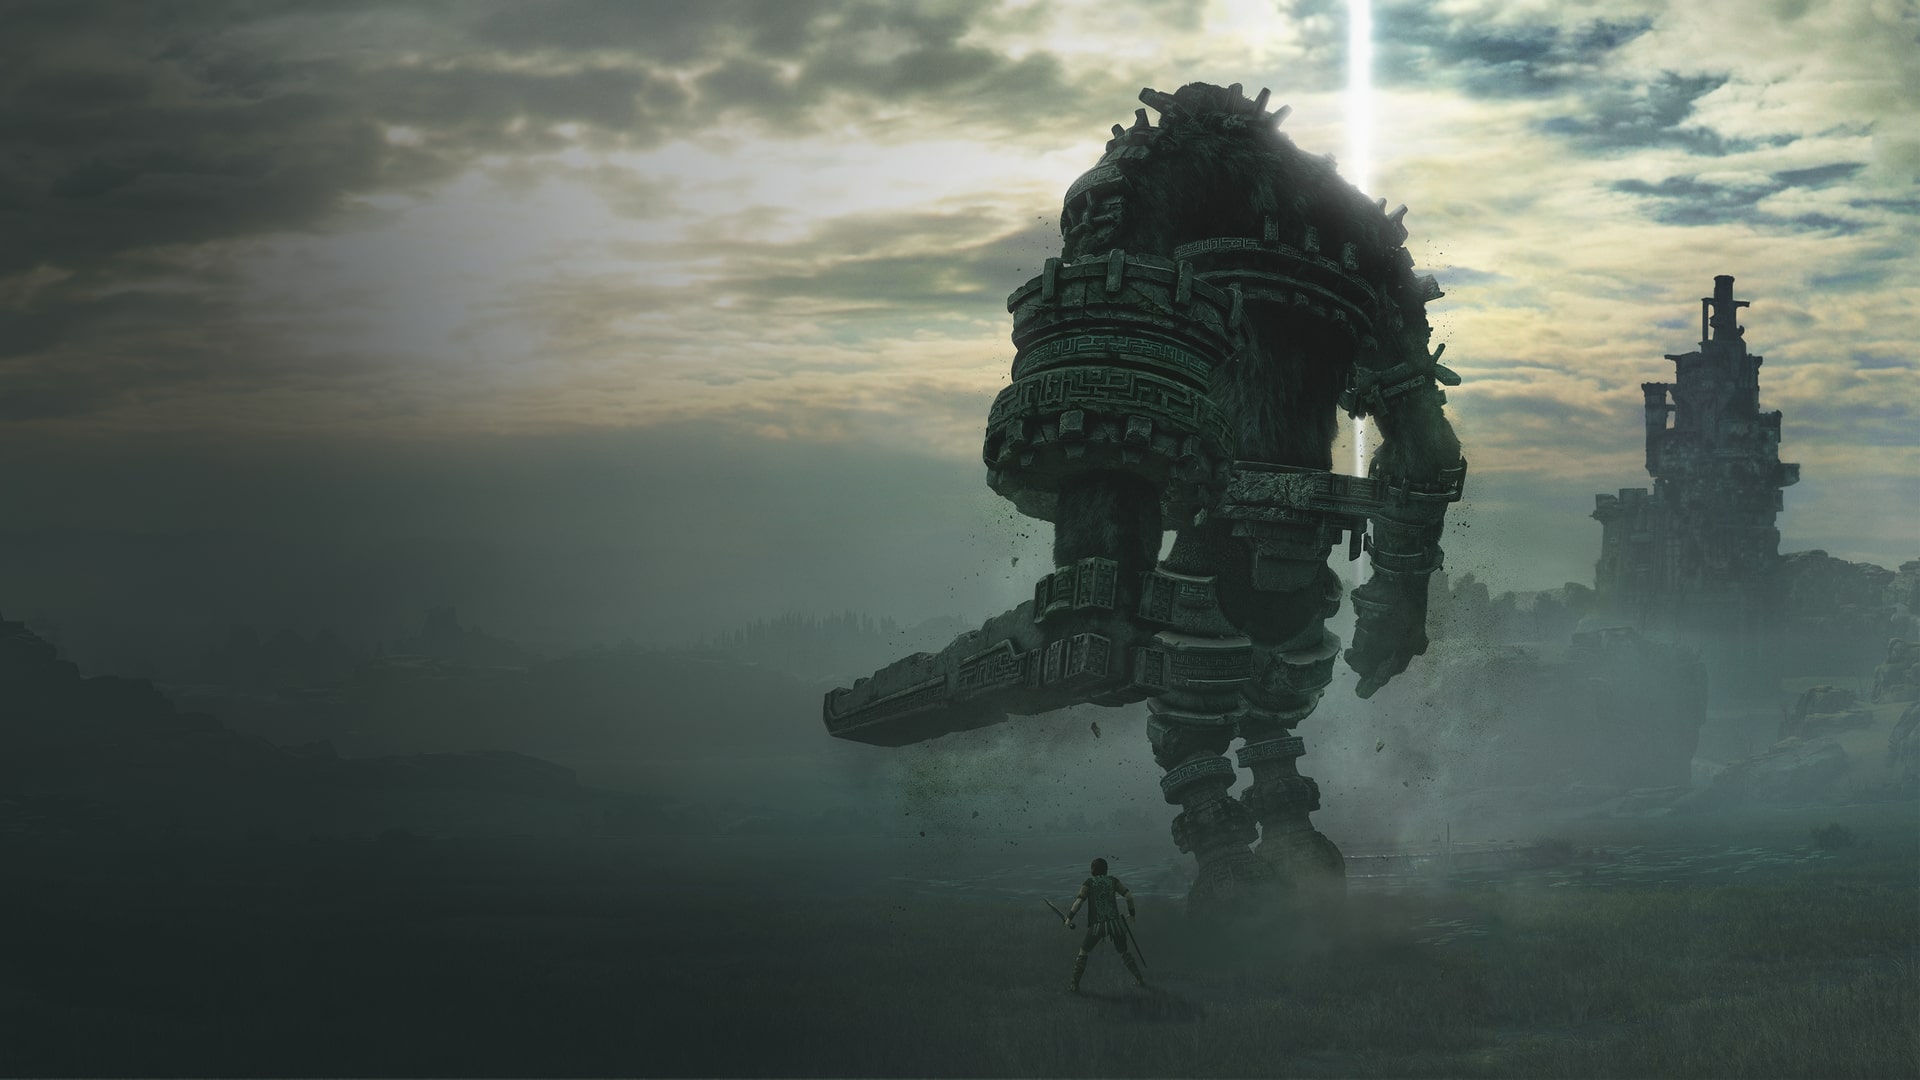 Download Shadow Of The Colossus (2018) wallpapers for mobile phone, free  Shadow Of The Colossus (2018) HD pictures